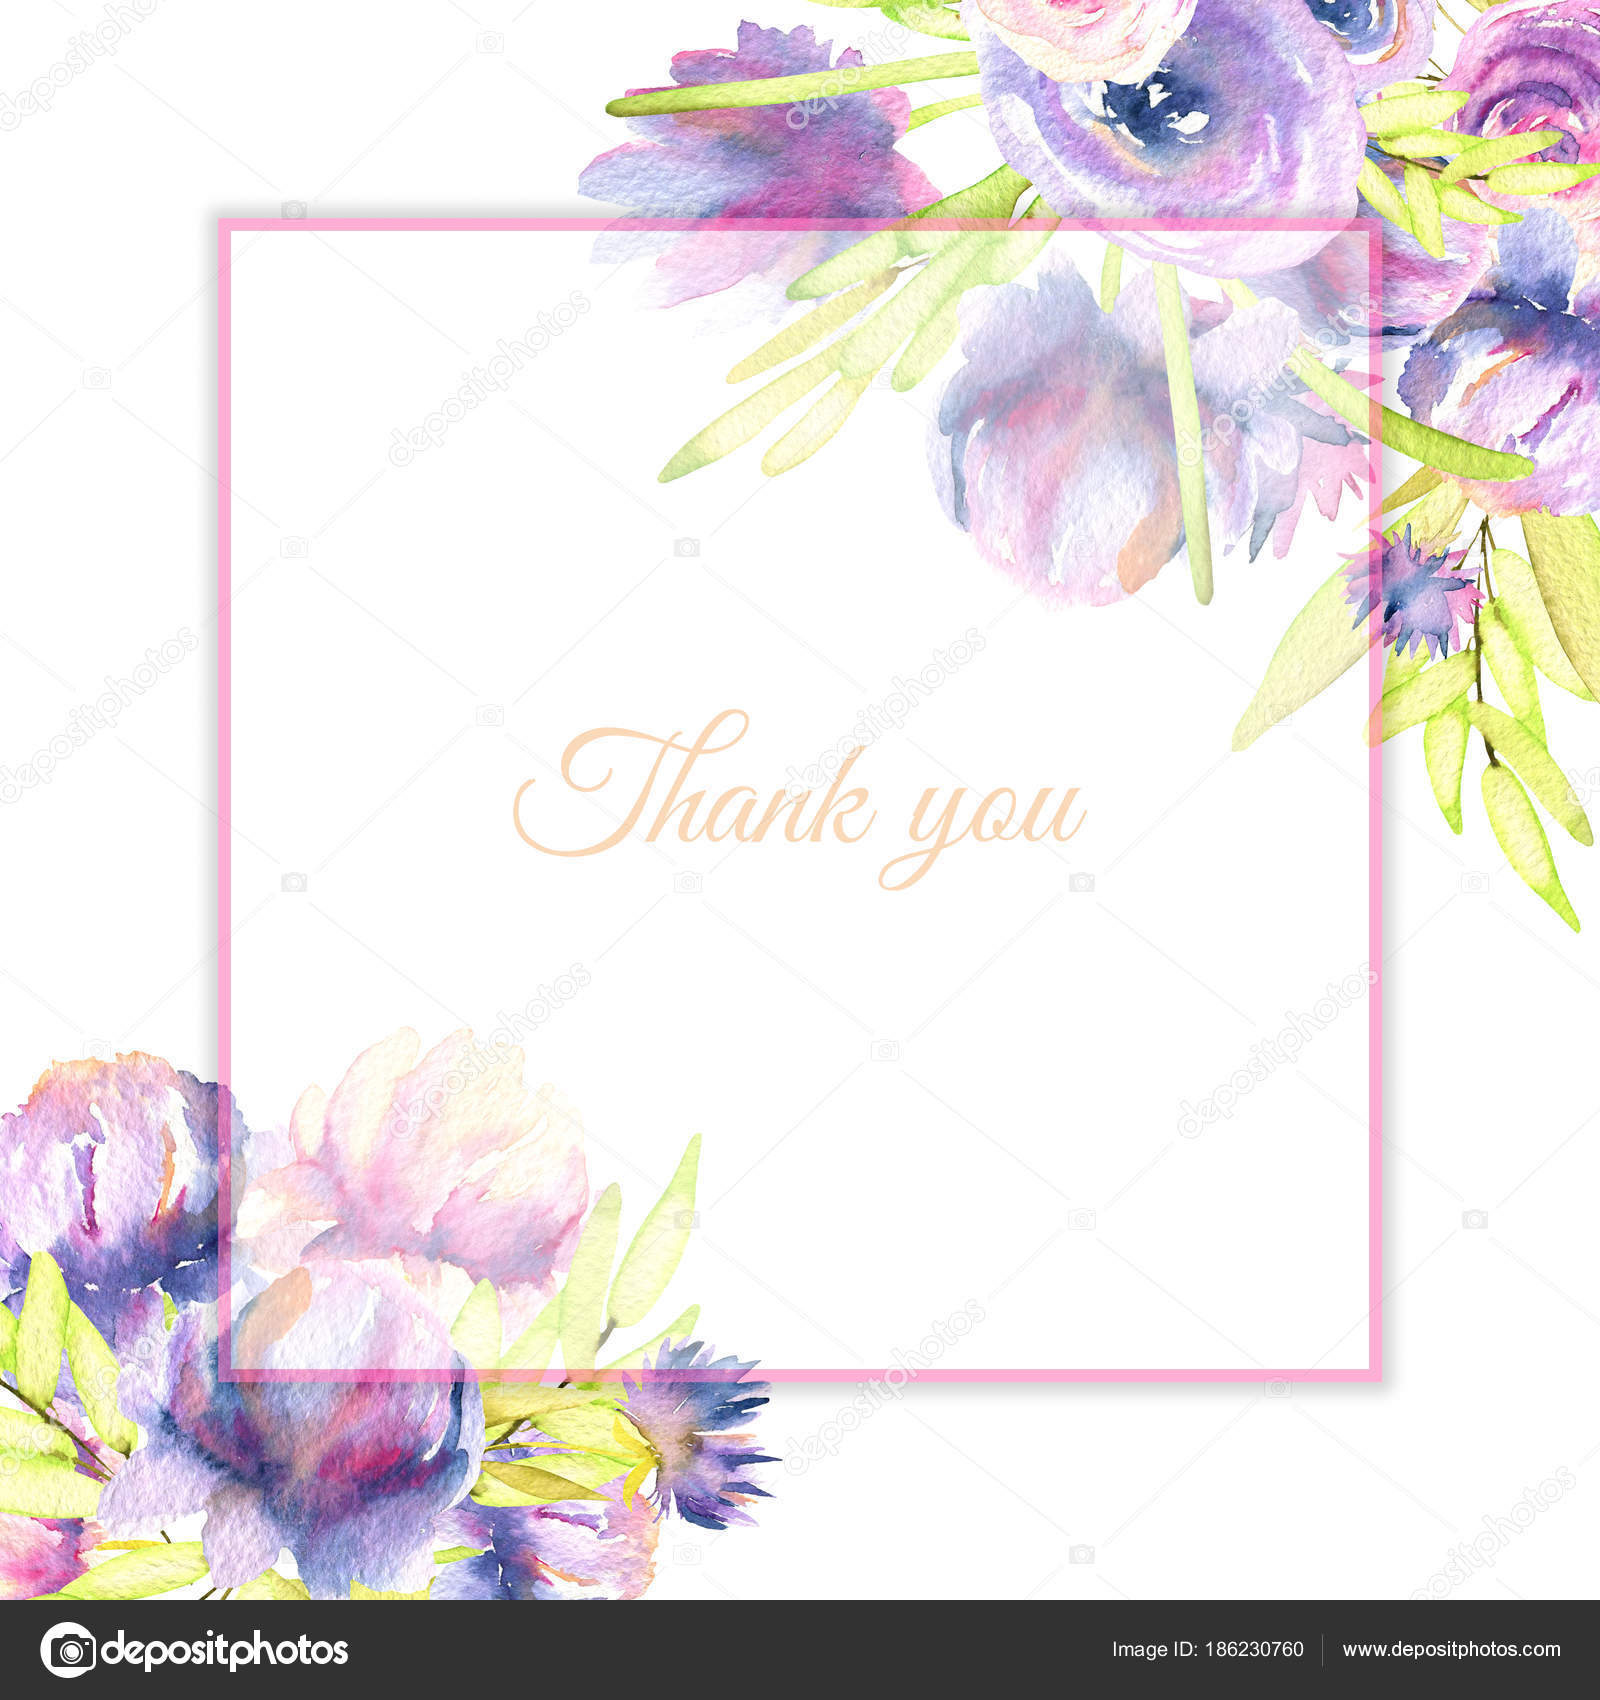 Lilac & Purple Peonies Personalized Wedding Thank You Cards